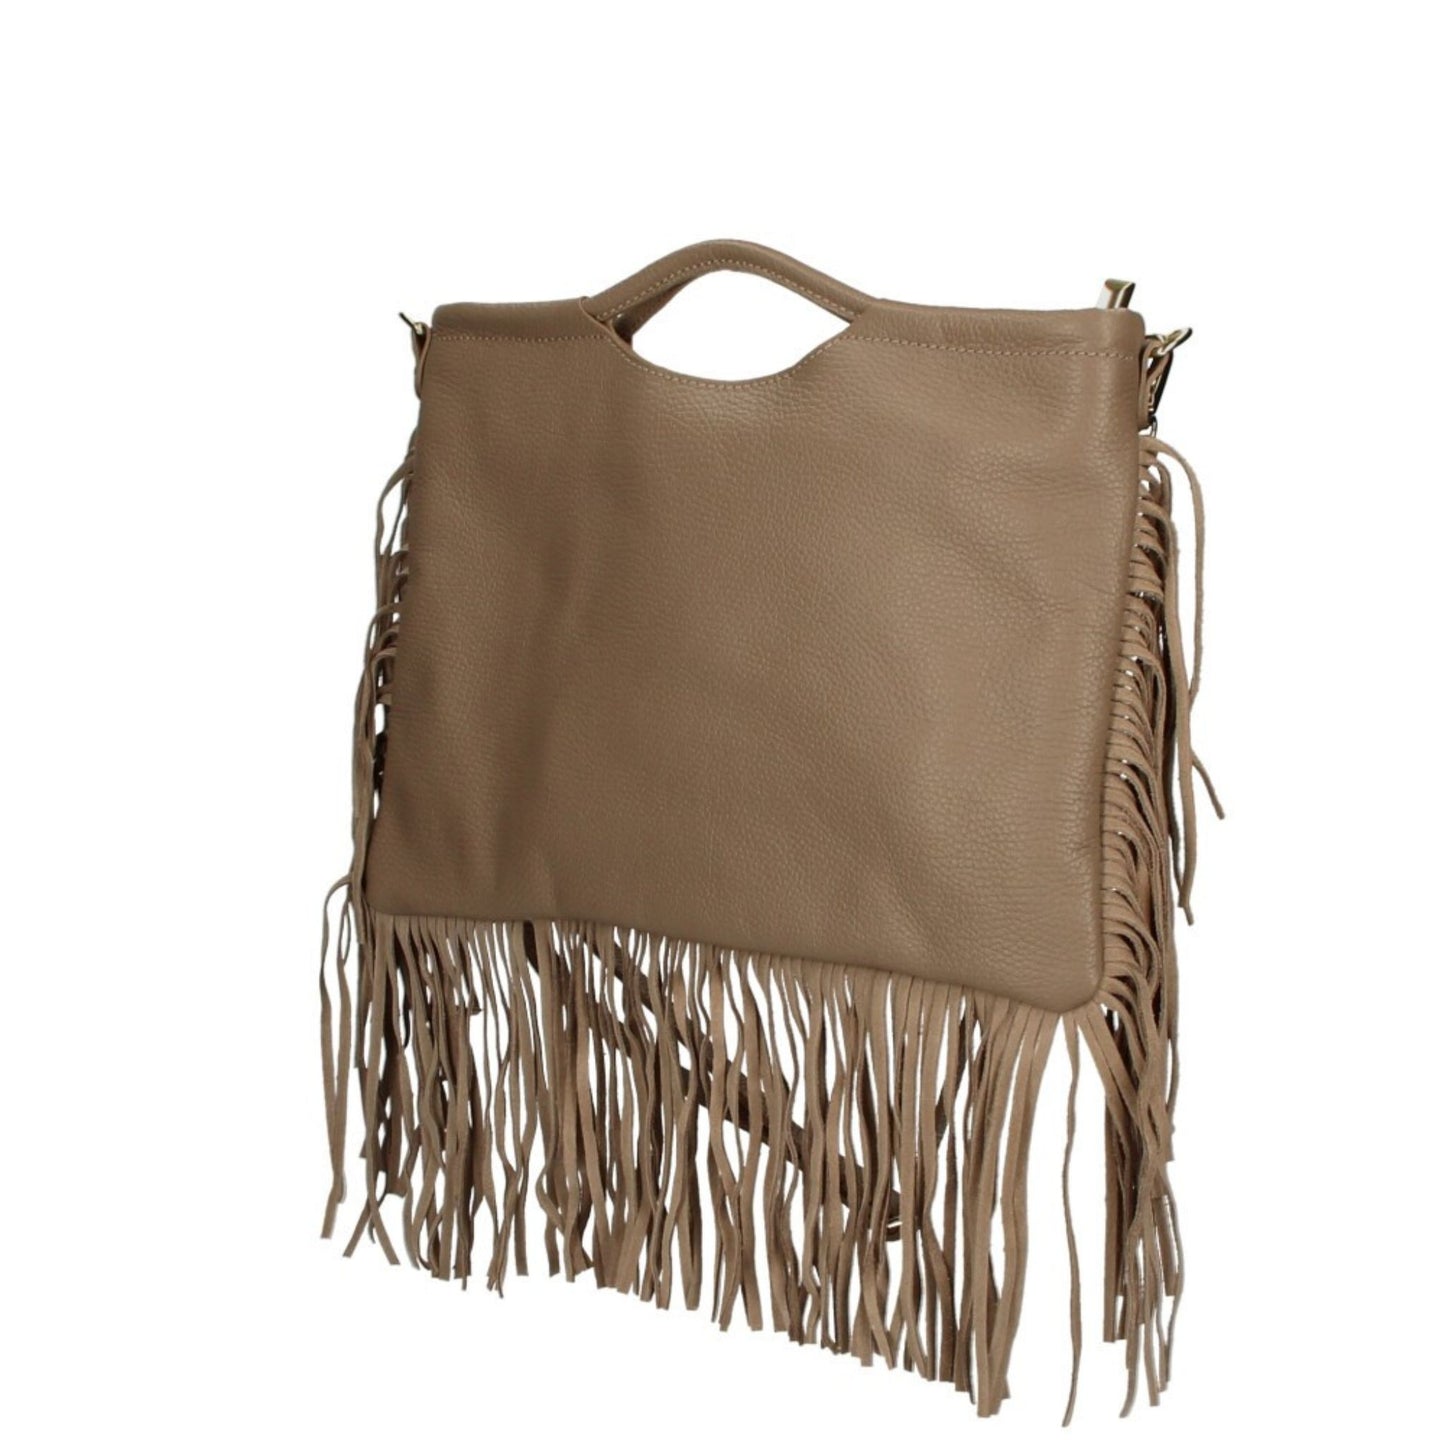 The Leather Fringed Bag